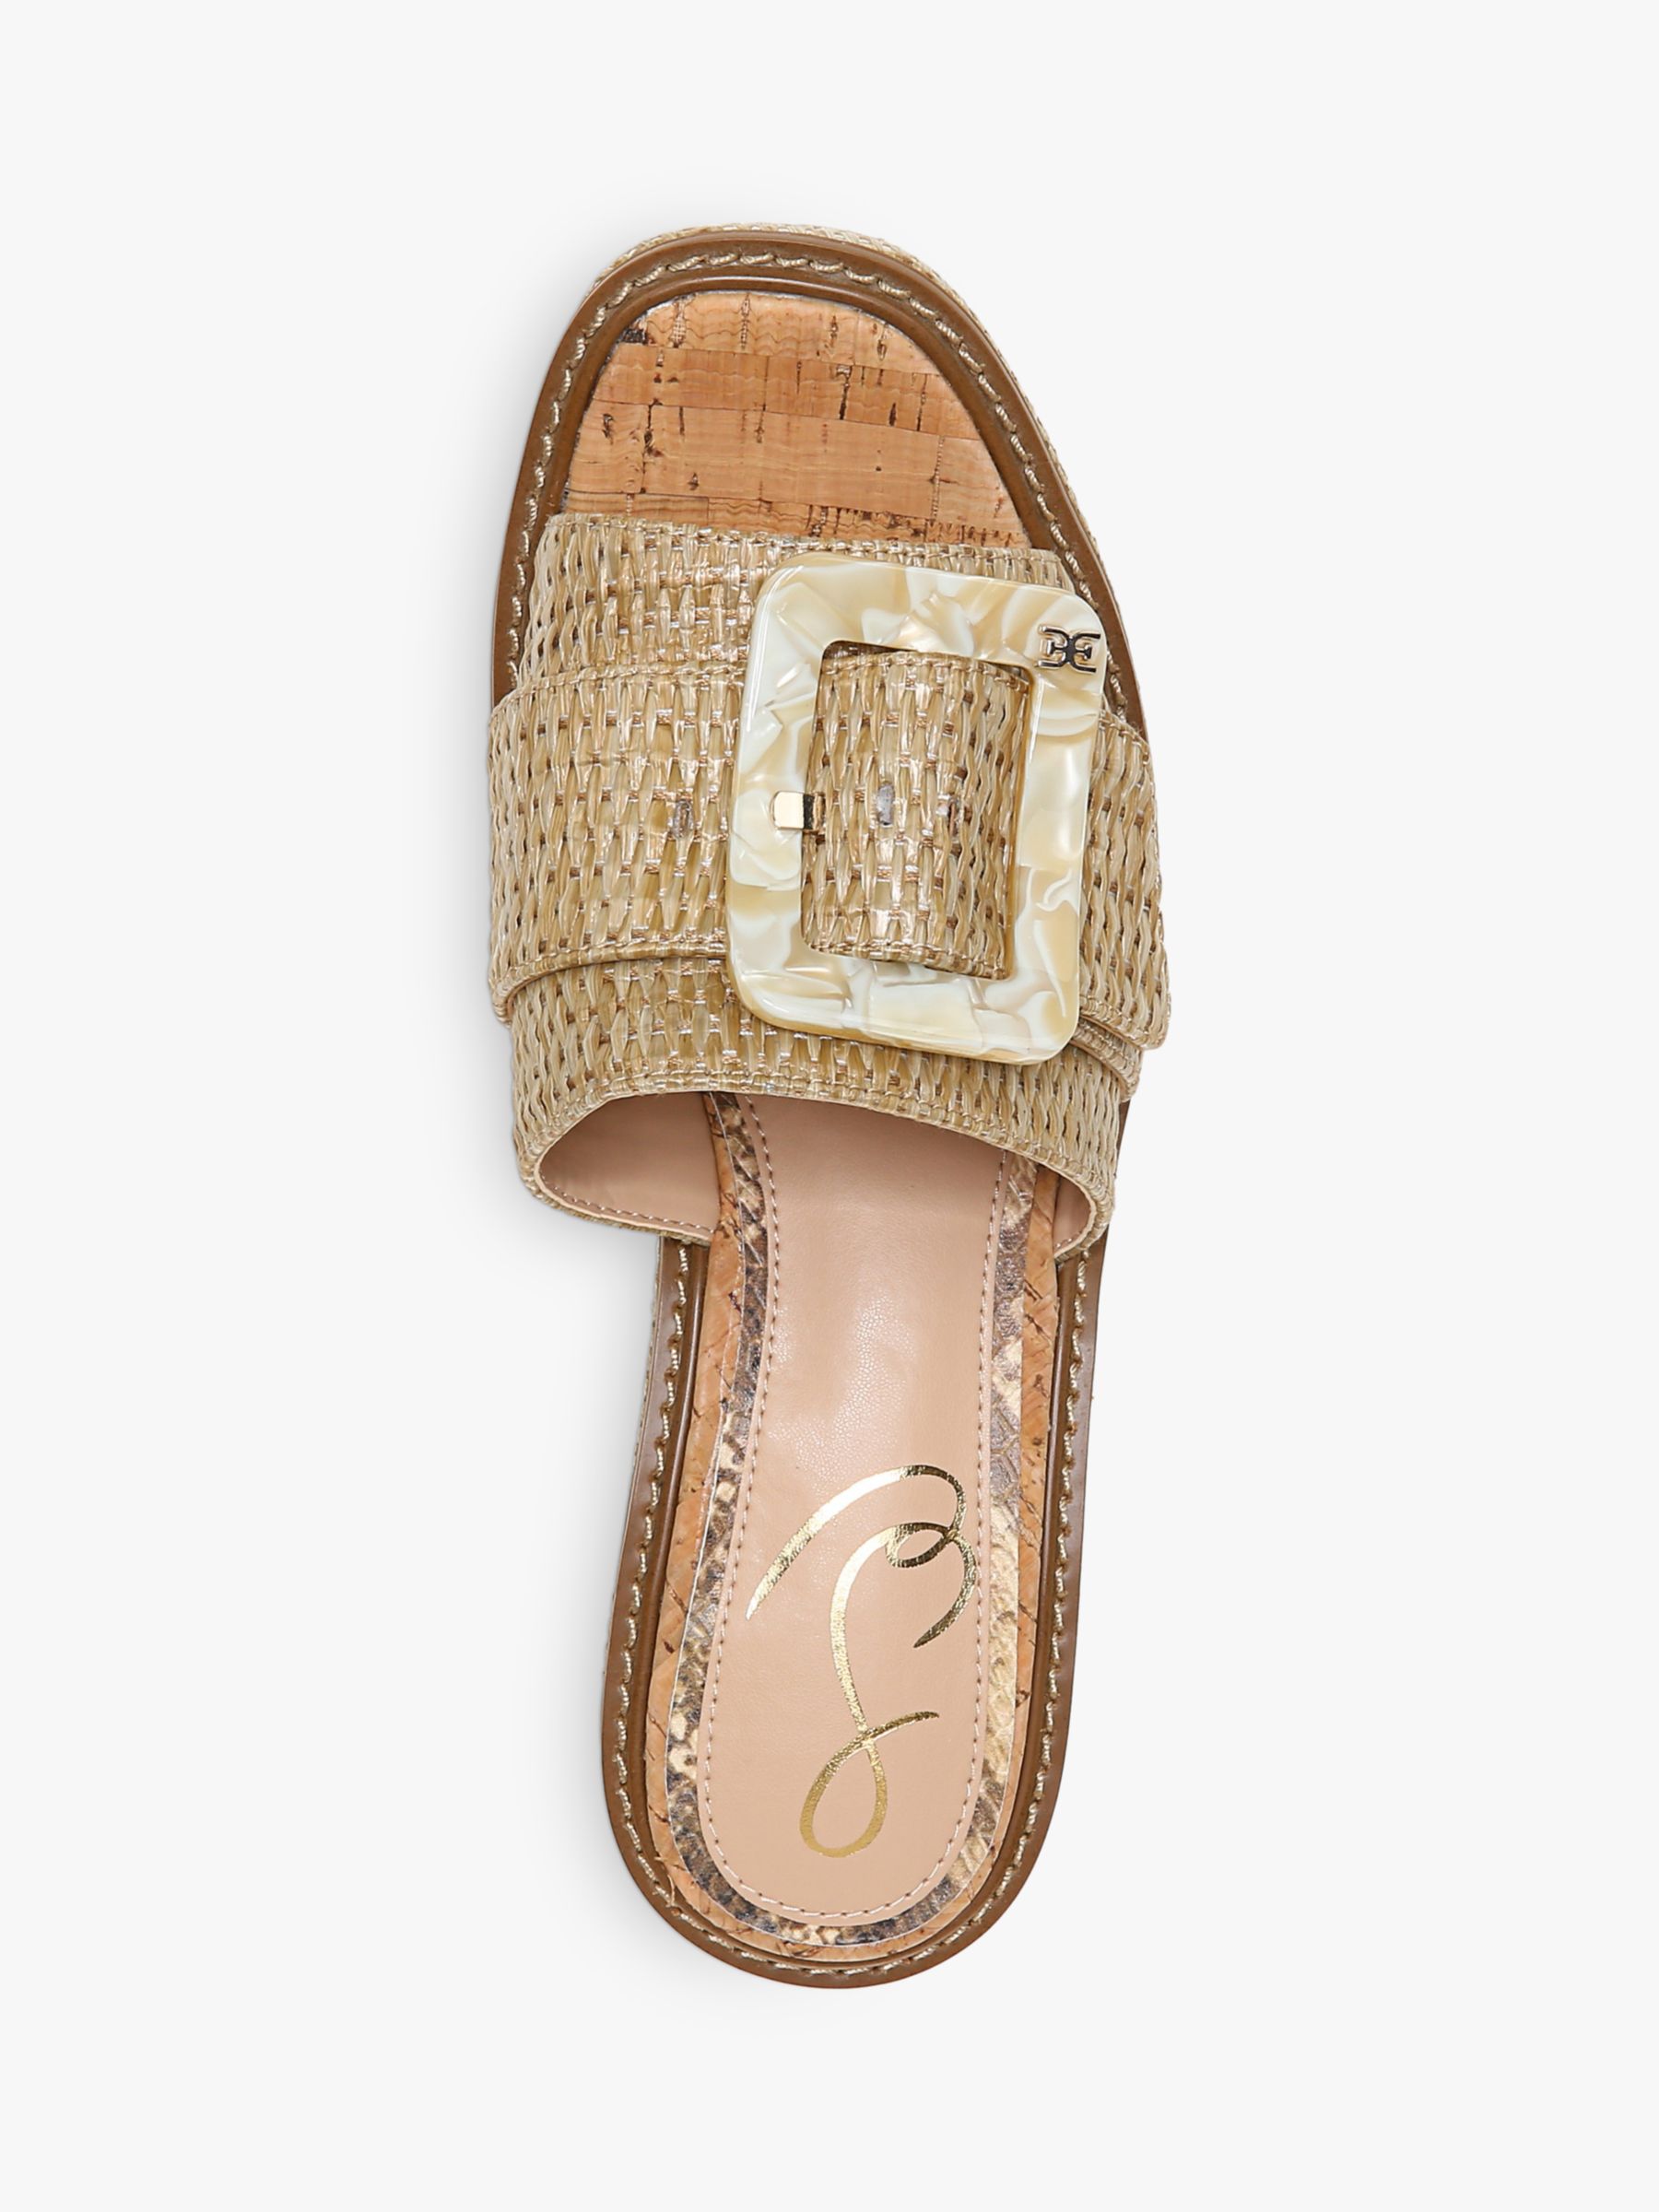 Sam Edelman Livi Wedge Heel Sandals Cuoio Natural At John Lewis And Partners